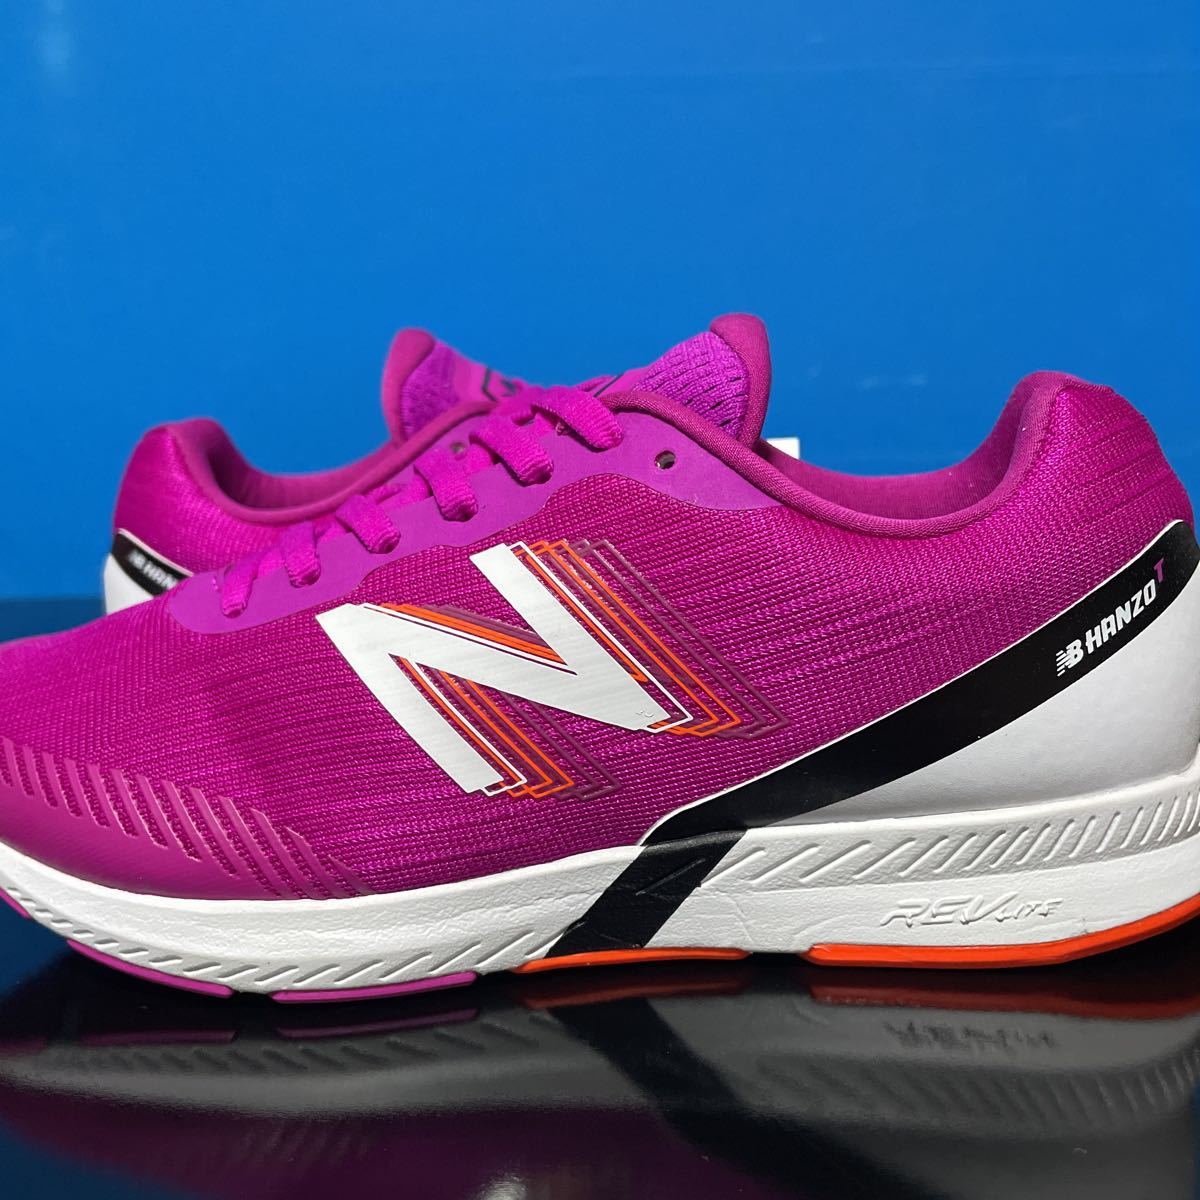 23.5cm* regular price 12100 jpy * New balance NB HANZO T W P3 handle zo- lady's running shoes pink sneakers training WHANZTP3